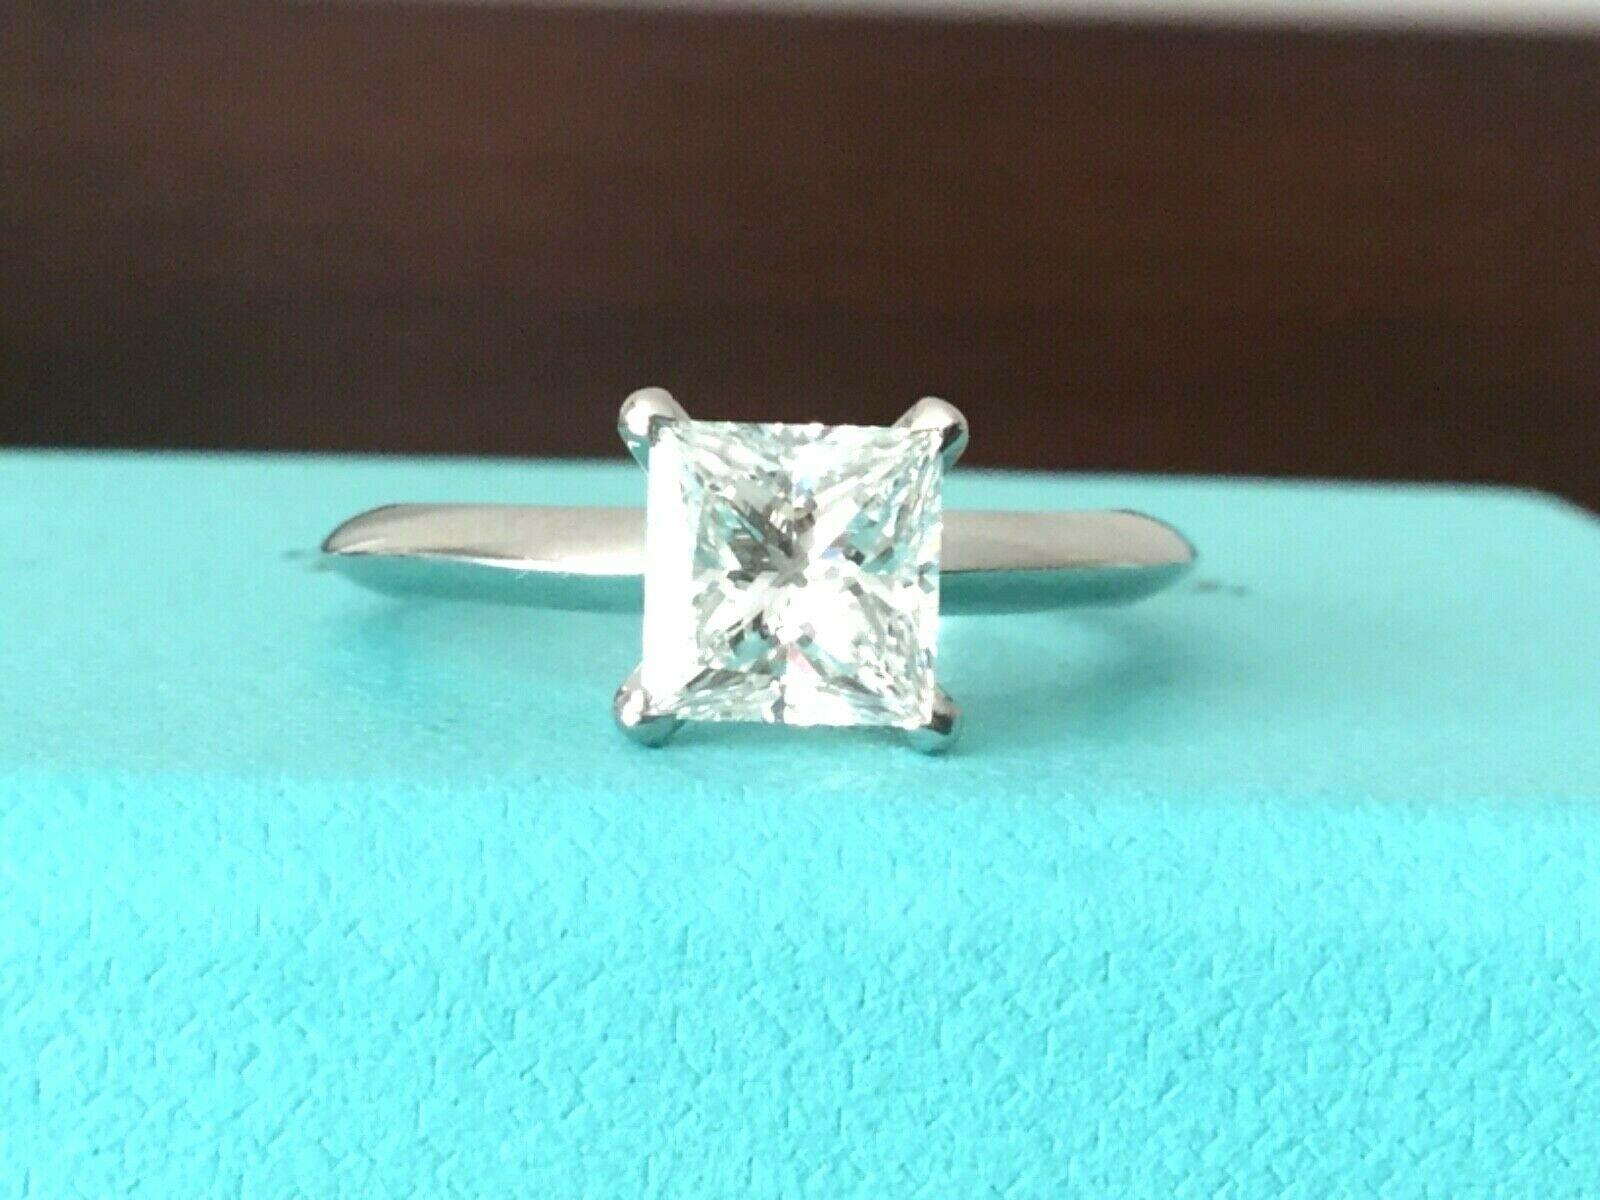 For your consideration is a stunning INVESTMENT GRADE F Color Triple Excellent Tiffany & Co Princess cut 1.26 carat natural diamond solitaire.  The ring shows like a brand new ring with no marks, scratches or nicks.  
This amazing ring retails at